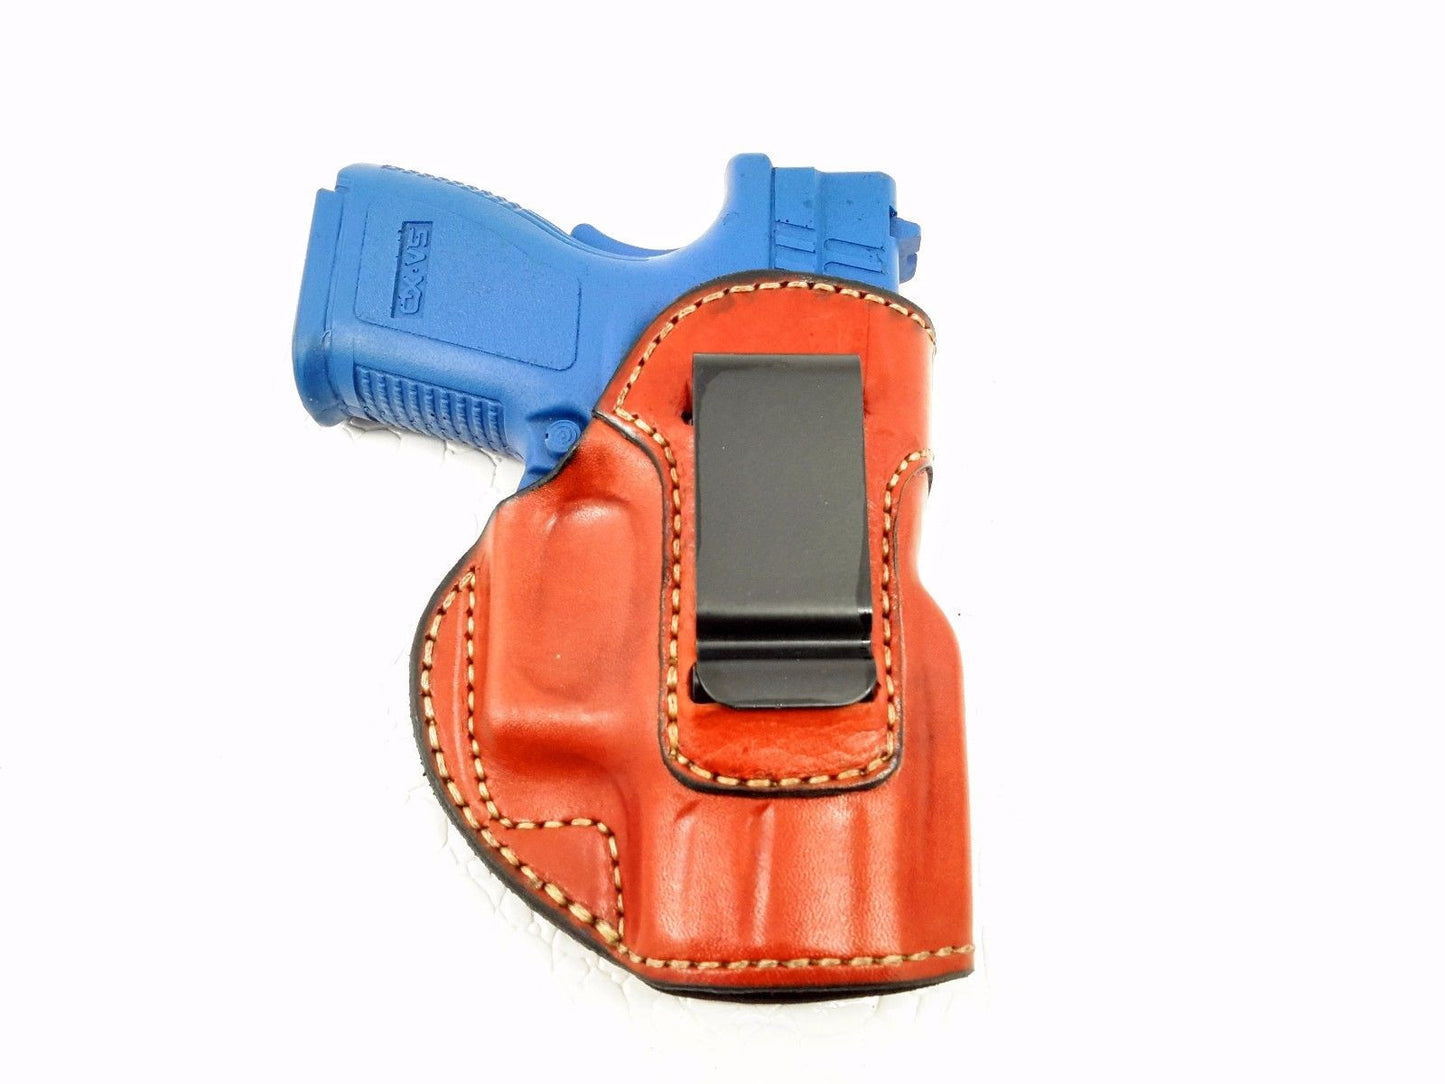 Springfield XD .40 S&W 3 Subcompact IWB Inside the Waistband Holster